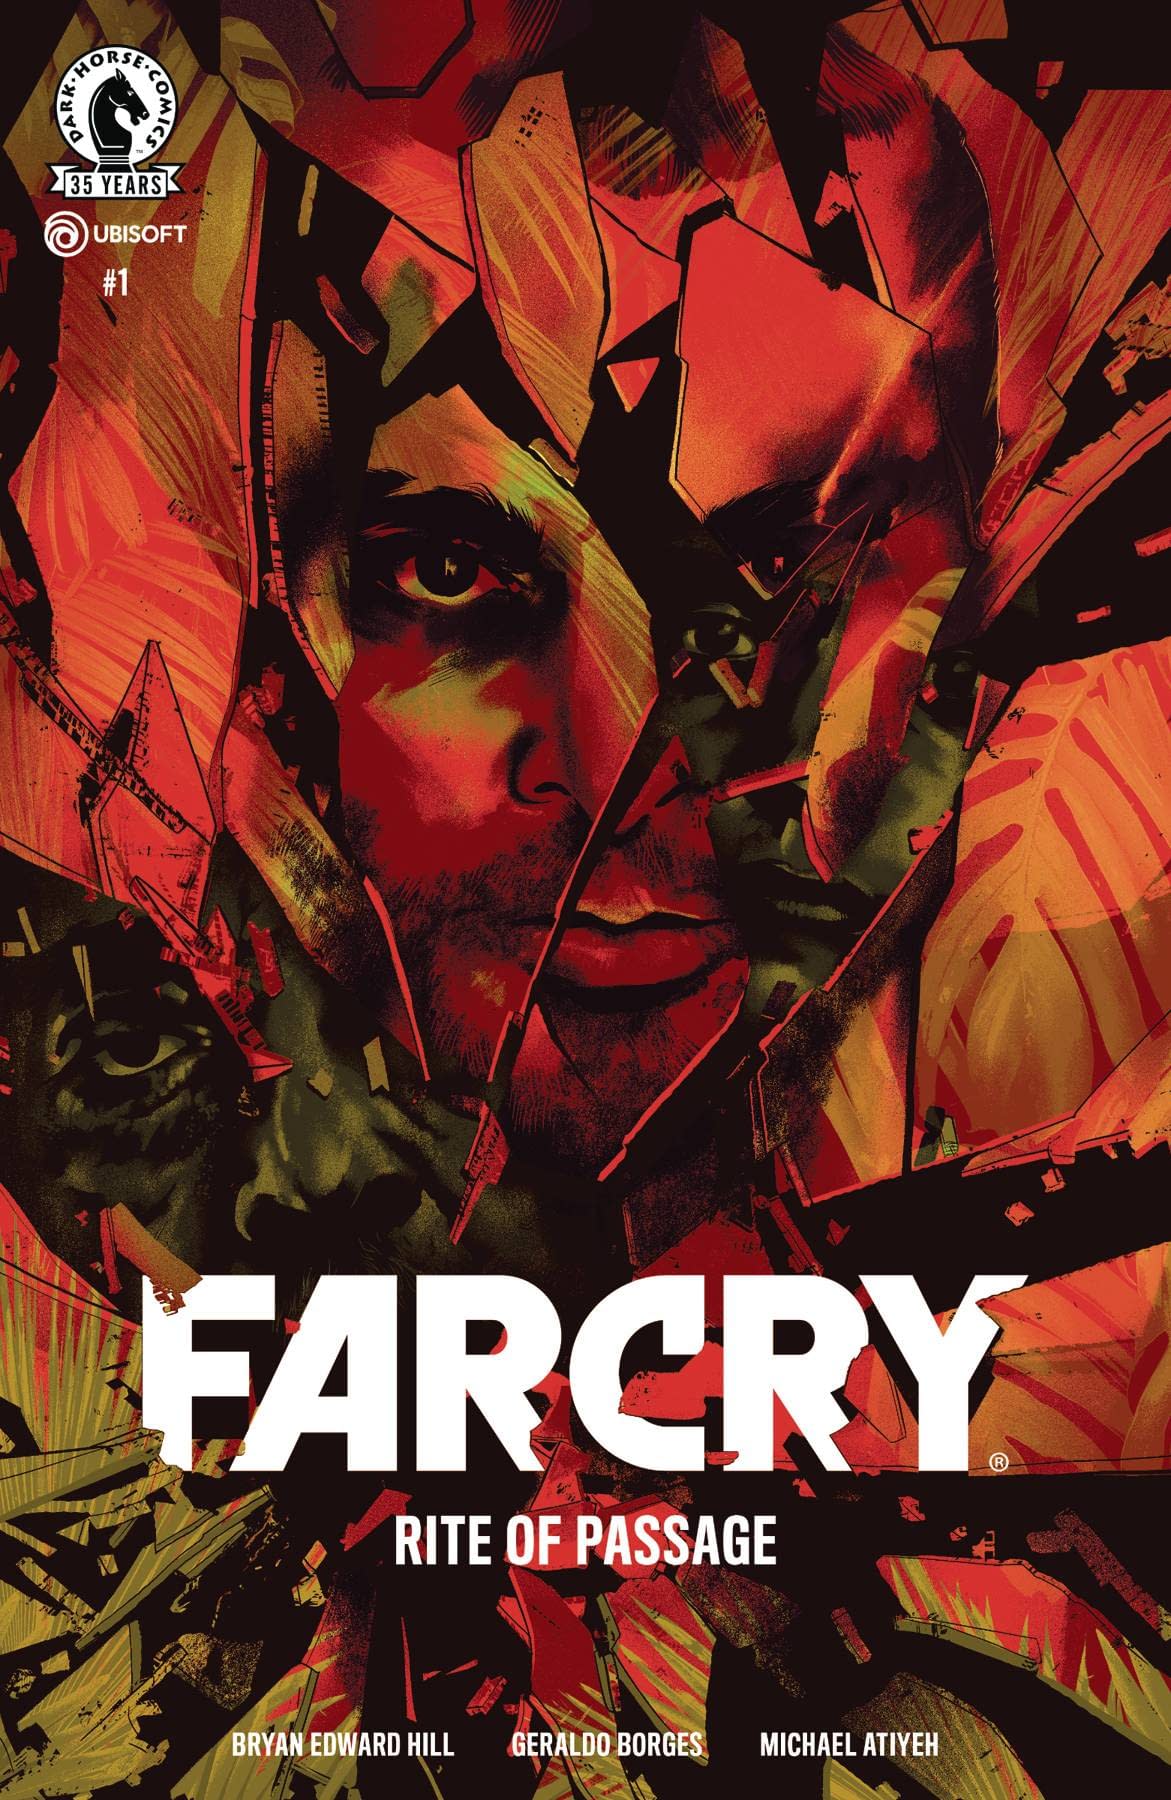 FAR CRY RITE OF PASSAGE #1 (OF 3)